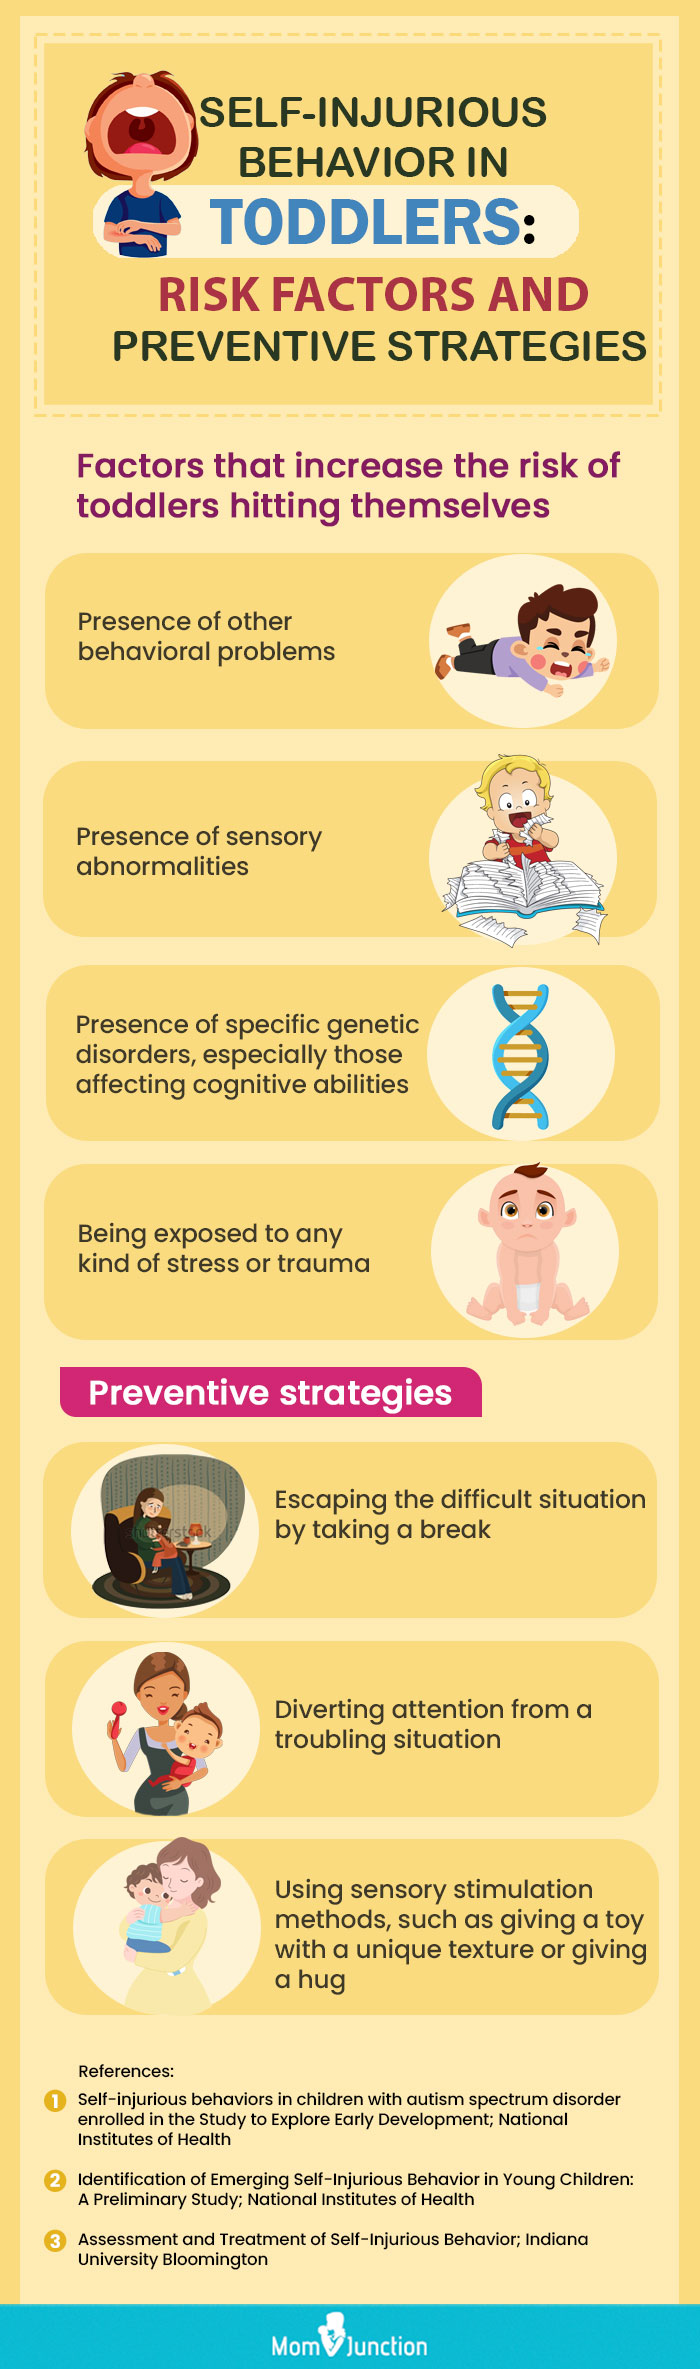 risk factors and preventive strategies (infographic)